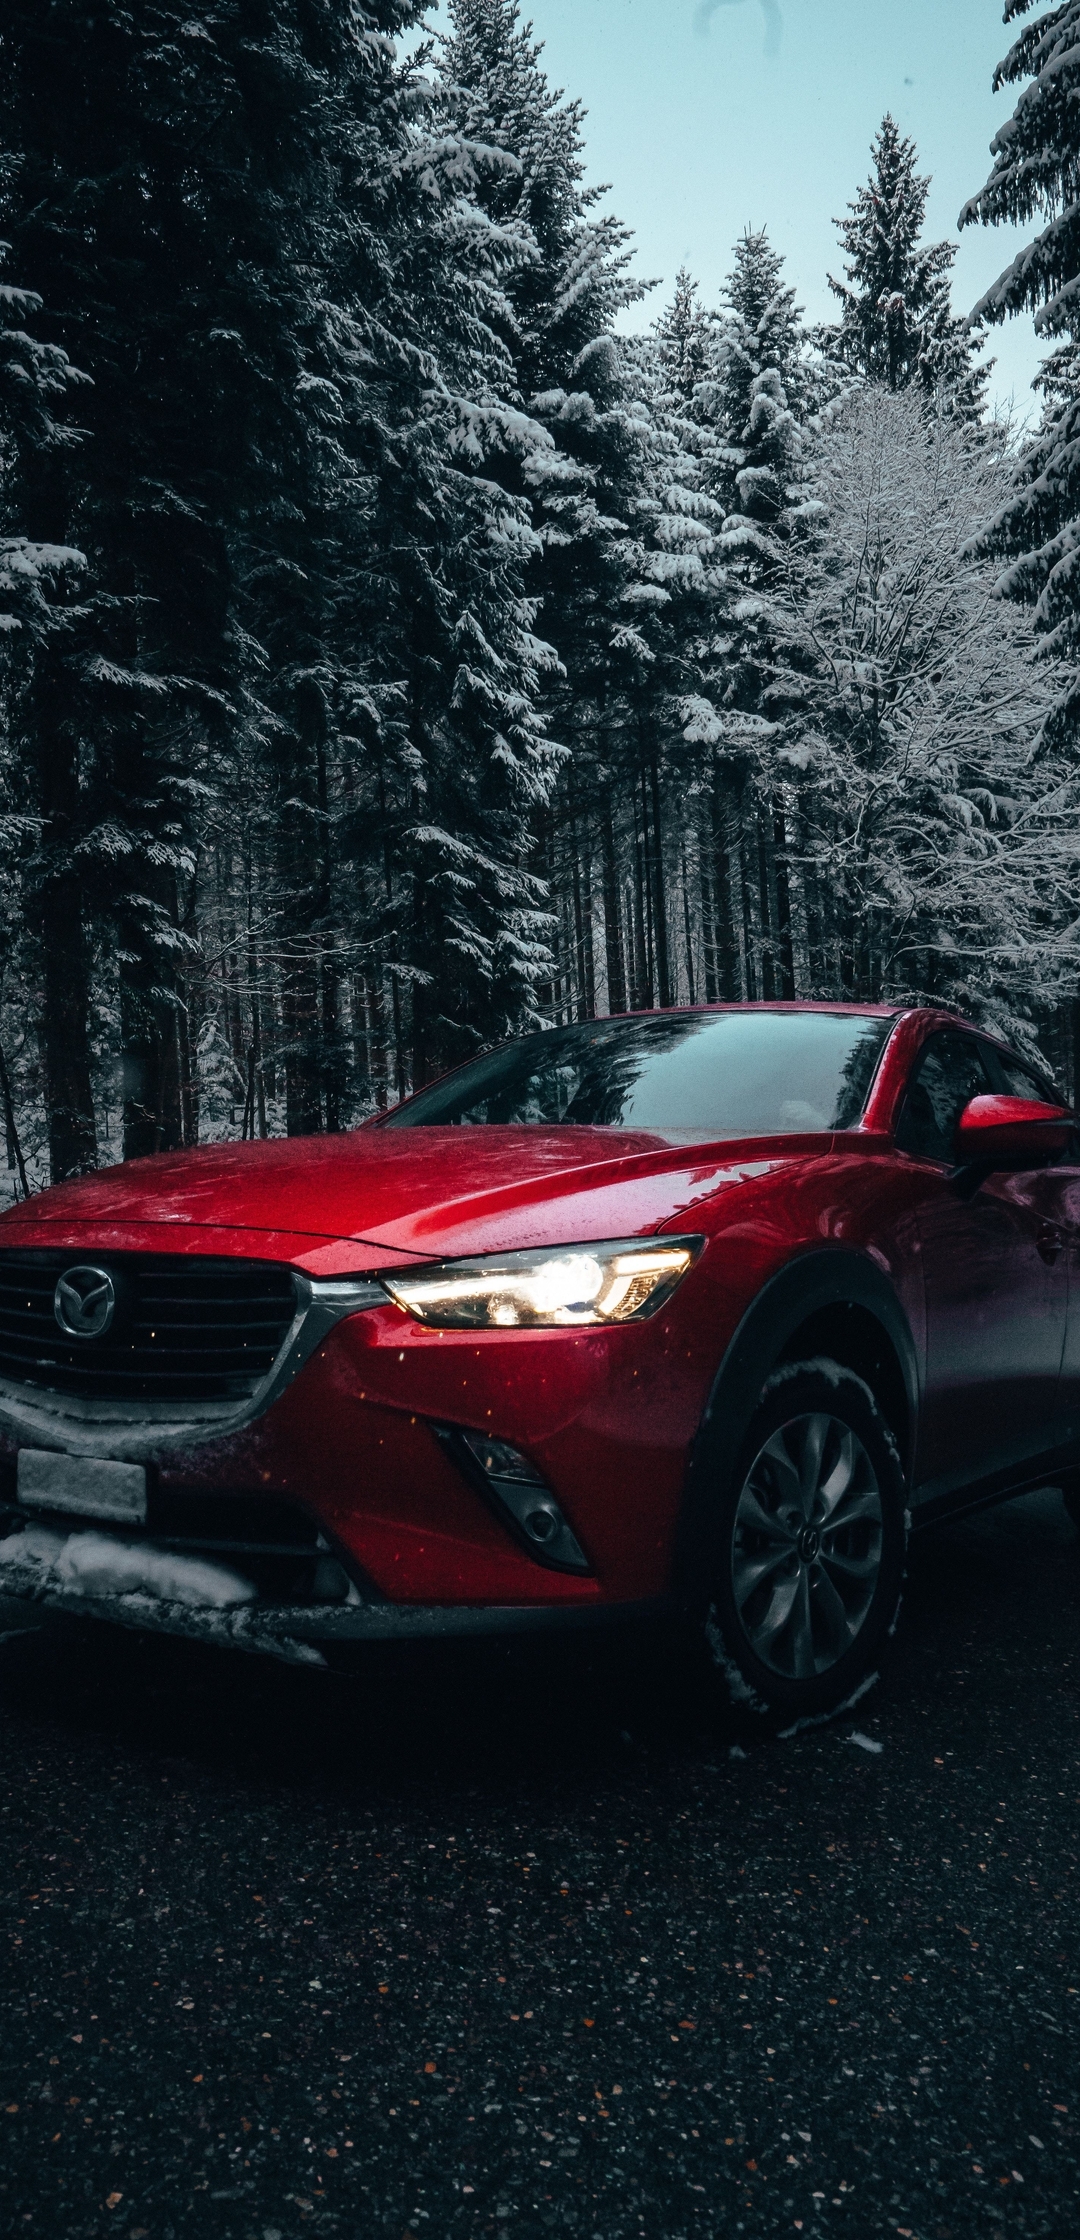 Image: Winter, forest, snow, road, trees, car, red, Mazda 6